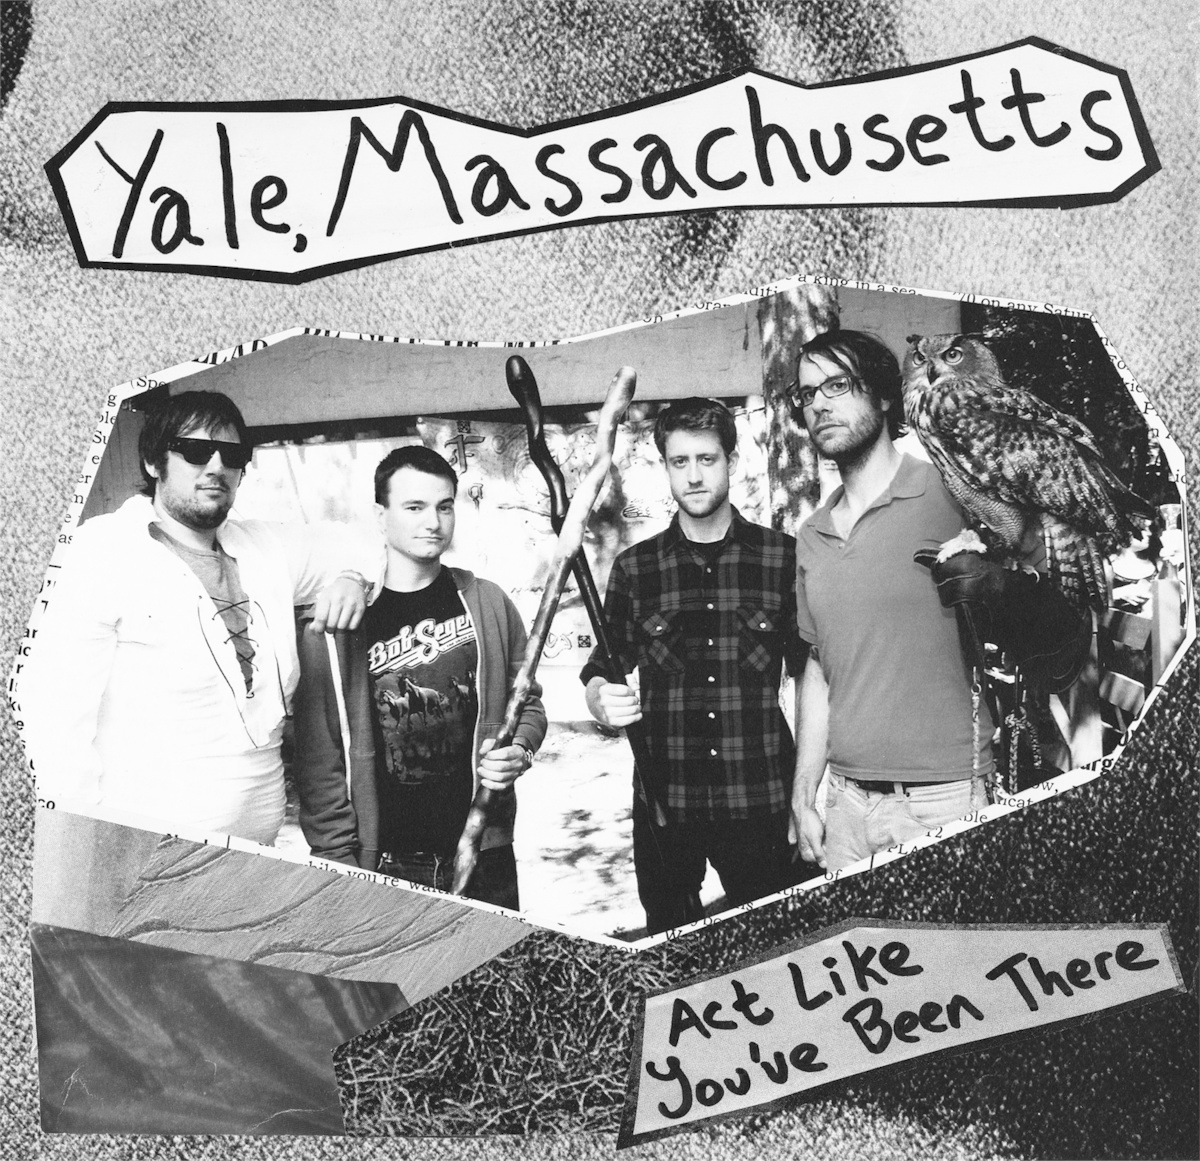 Yale, MA - Act Like You've Been There 7"